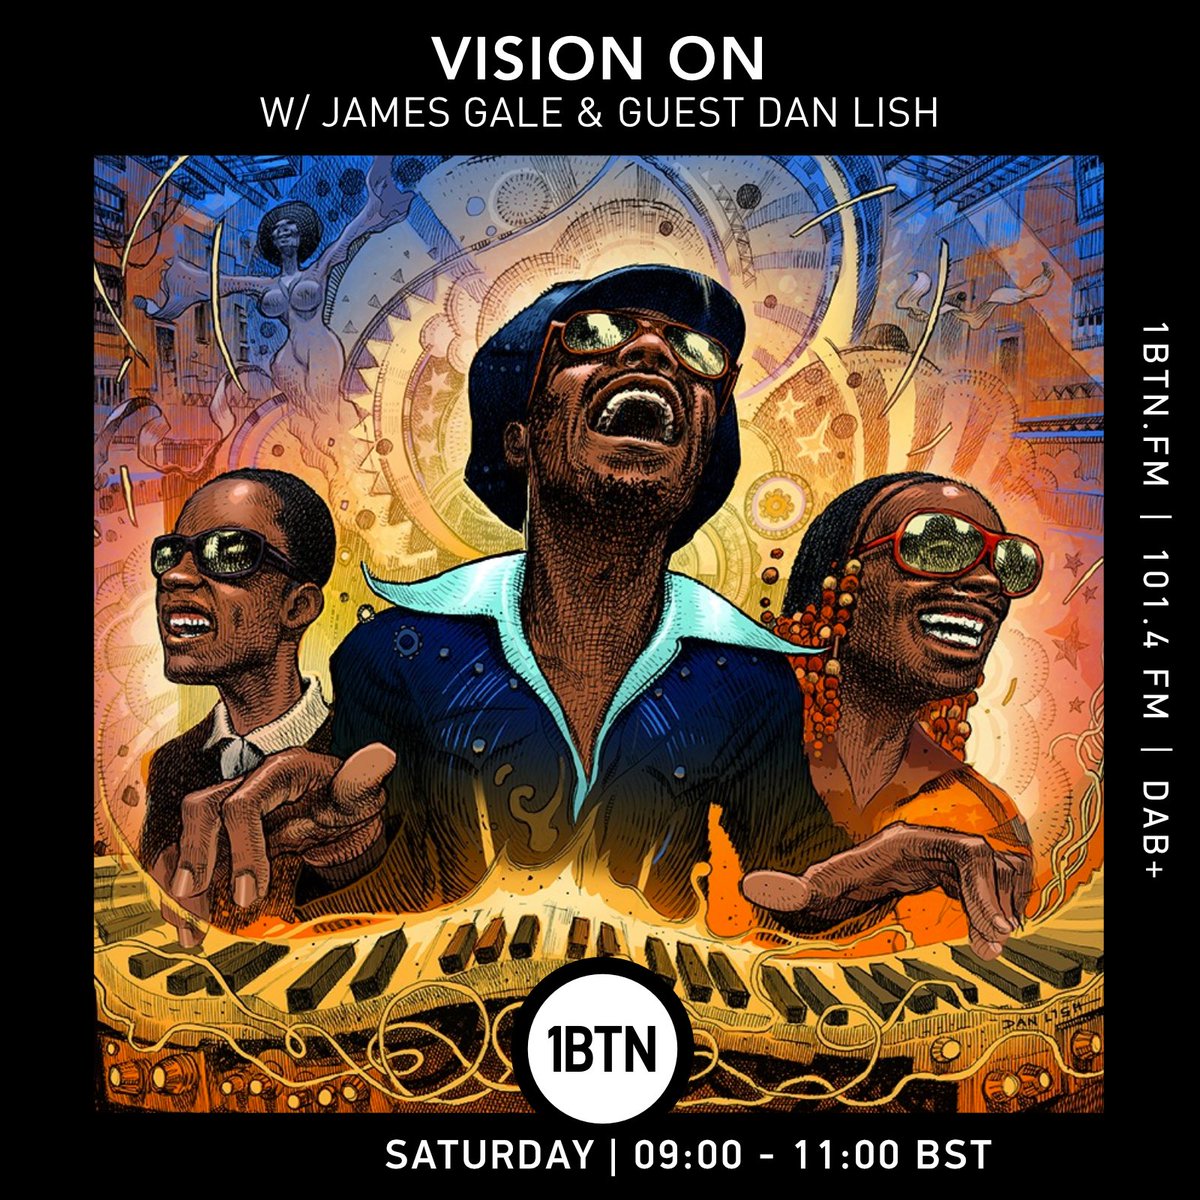 I’m playing records and chatting about the Egostrip re-print/project tomorrow (Saturday) morning at 9.30 GMT on 1BTN! Come and listen, it’s going to be fantabulous! @visiononmusic #1btn #visionon #radioshow #dj #danlish #egostrip #artbook #music #artwork #steviewonder #create